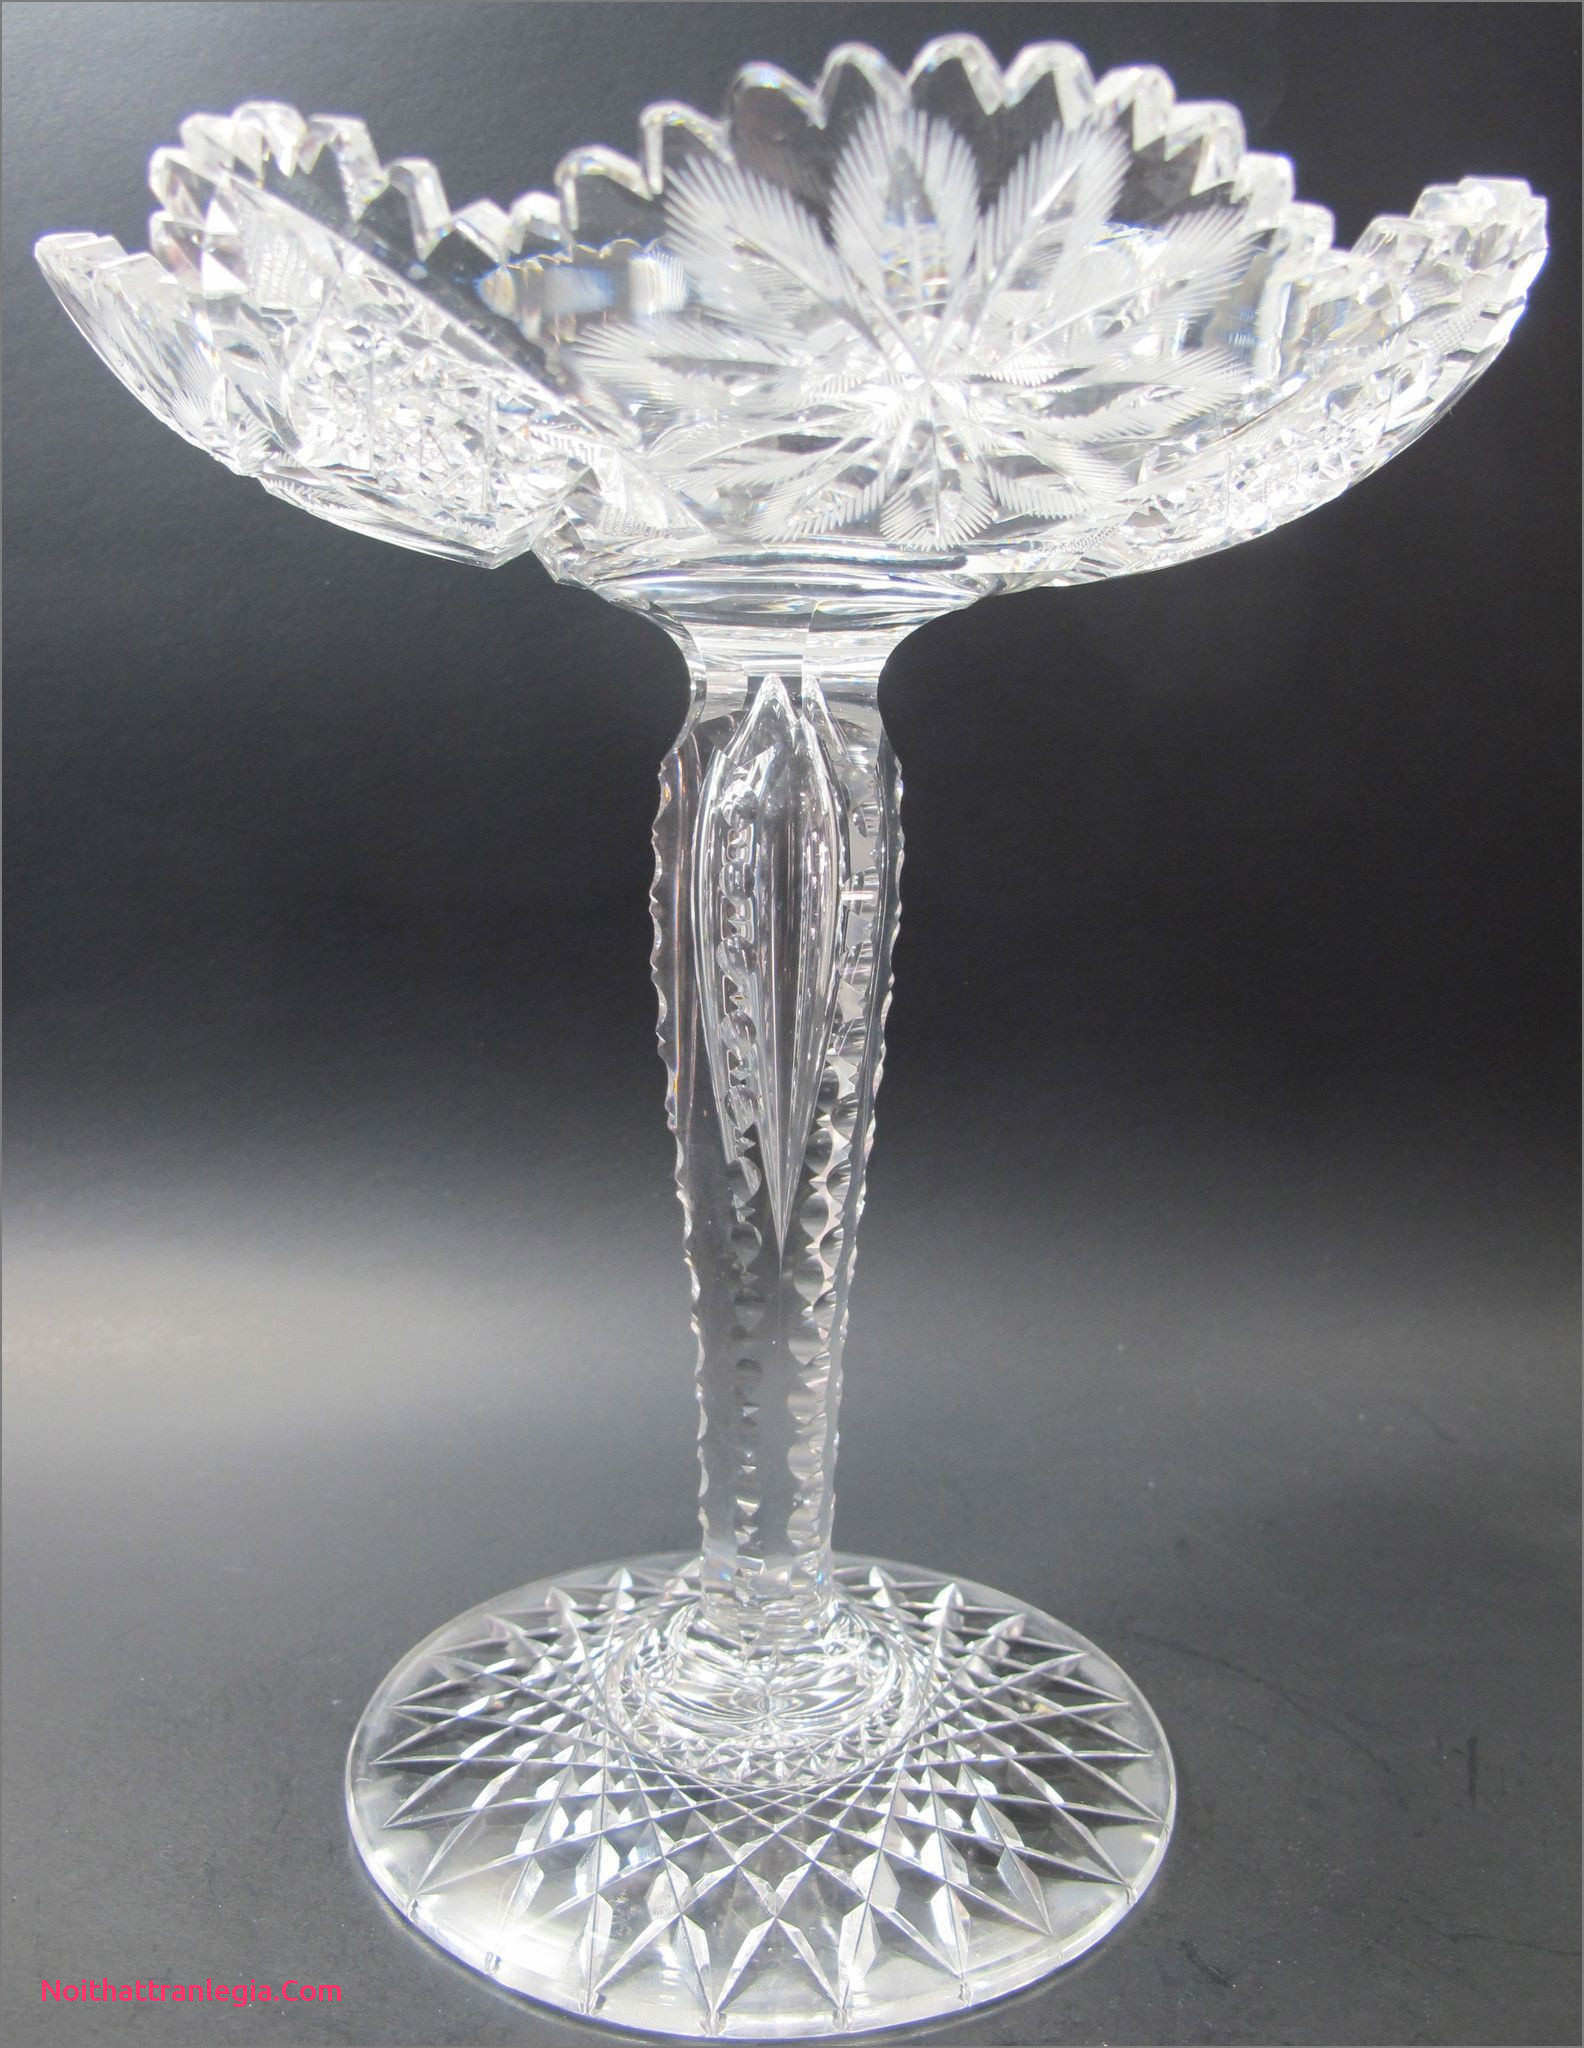 16 Famous Extra Large Clear Glass Floor Vases 2024 free download extra large clear glass floor vases of 20 cut glass antique vase noithattranlegia vases design in fering this abp antique cut glass pote from the american brilliant period 1886 1916 9 5